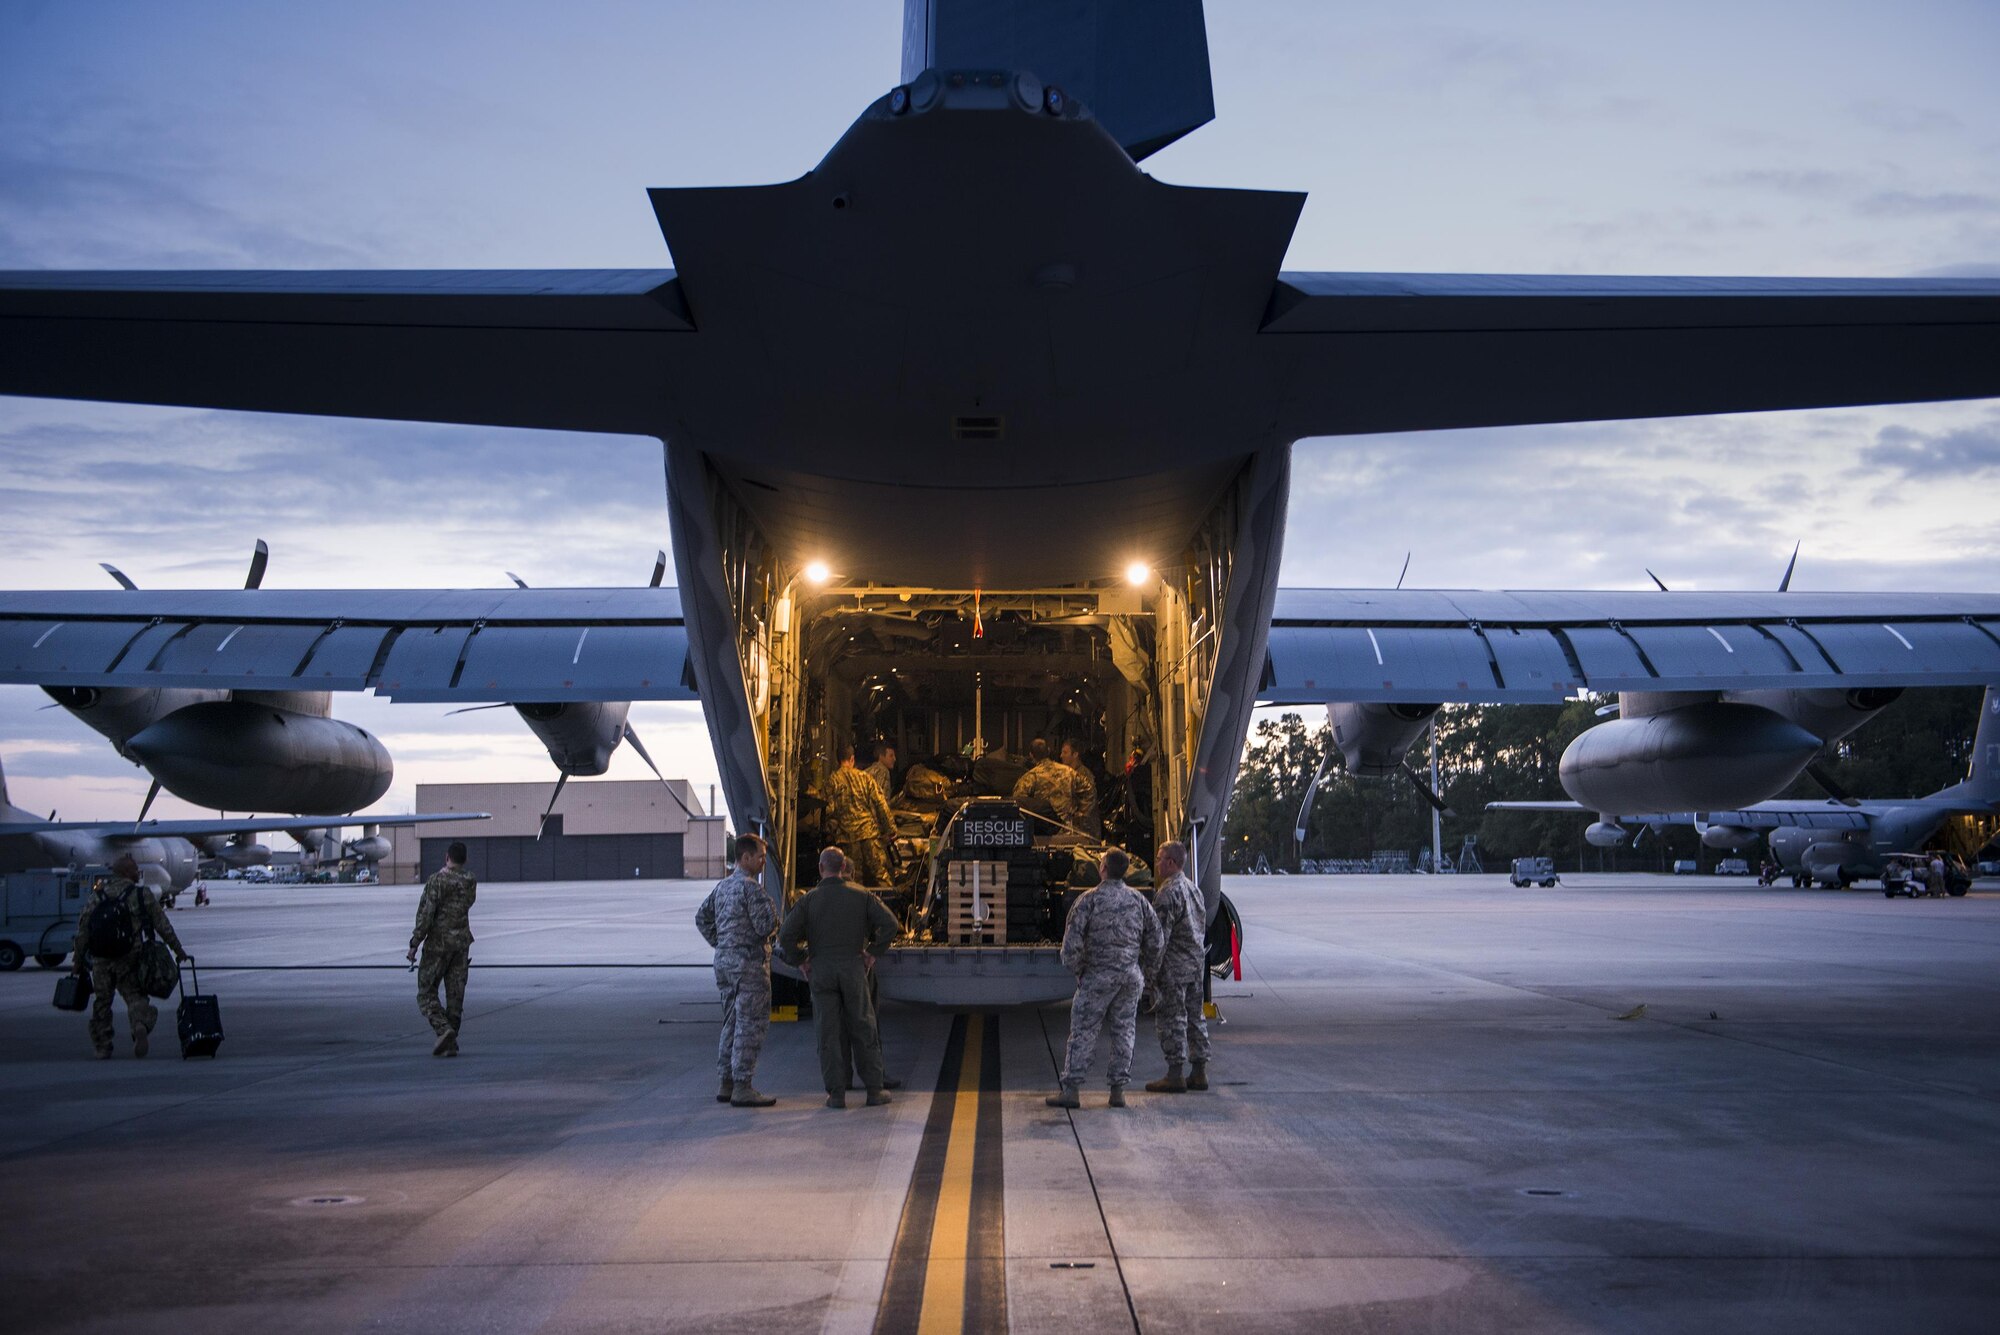 Airmen from the 71st Rescue Squadron secure cargo in the back of an HC-130J Combat King II Nov. 27, 2015, at Moody Air Force Base, Ga. The Airmen deployed in support of Operation Inherent Resolve. (U.S. Air Force photo/Senior Airman Ryan Callaghan)